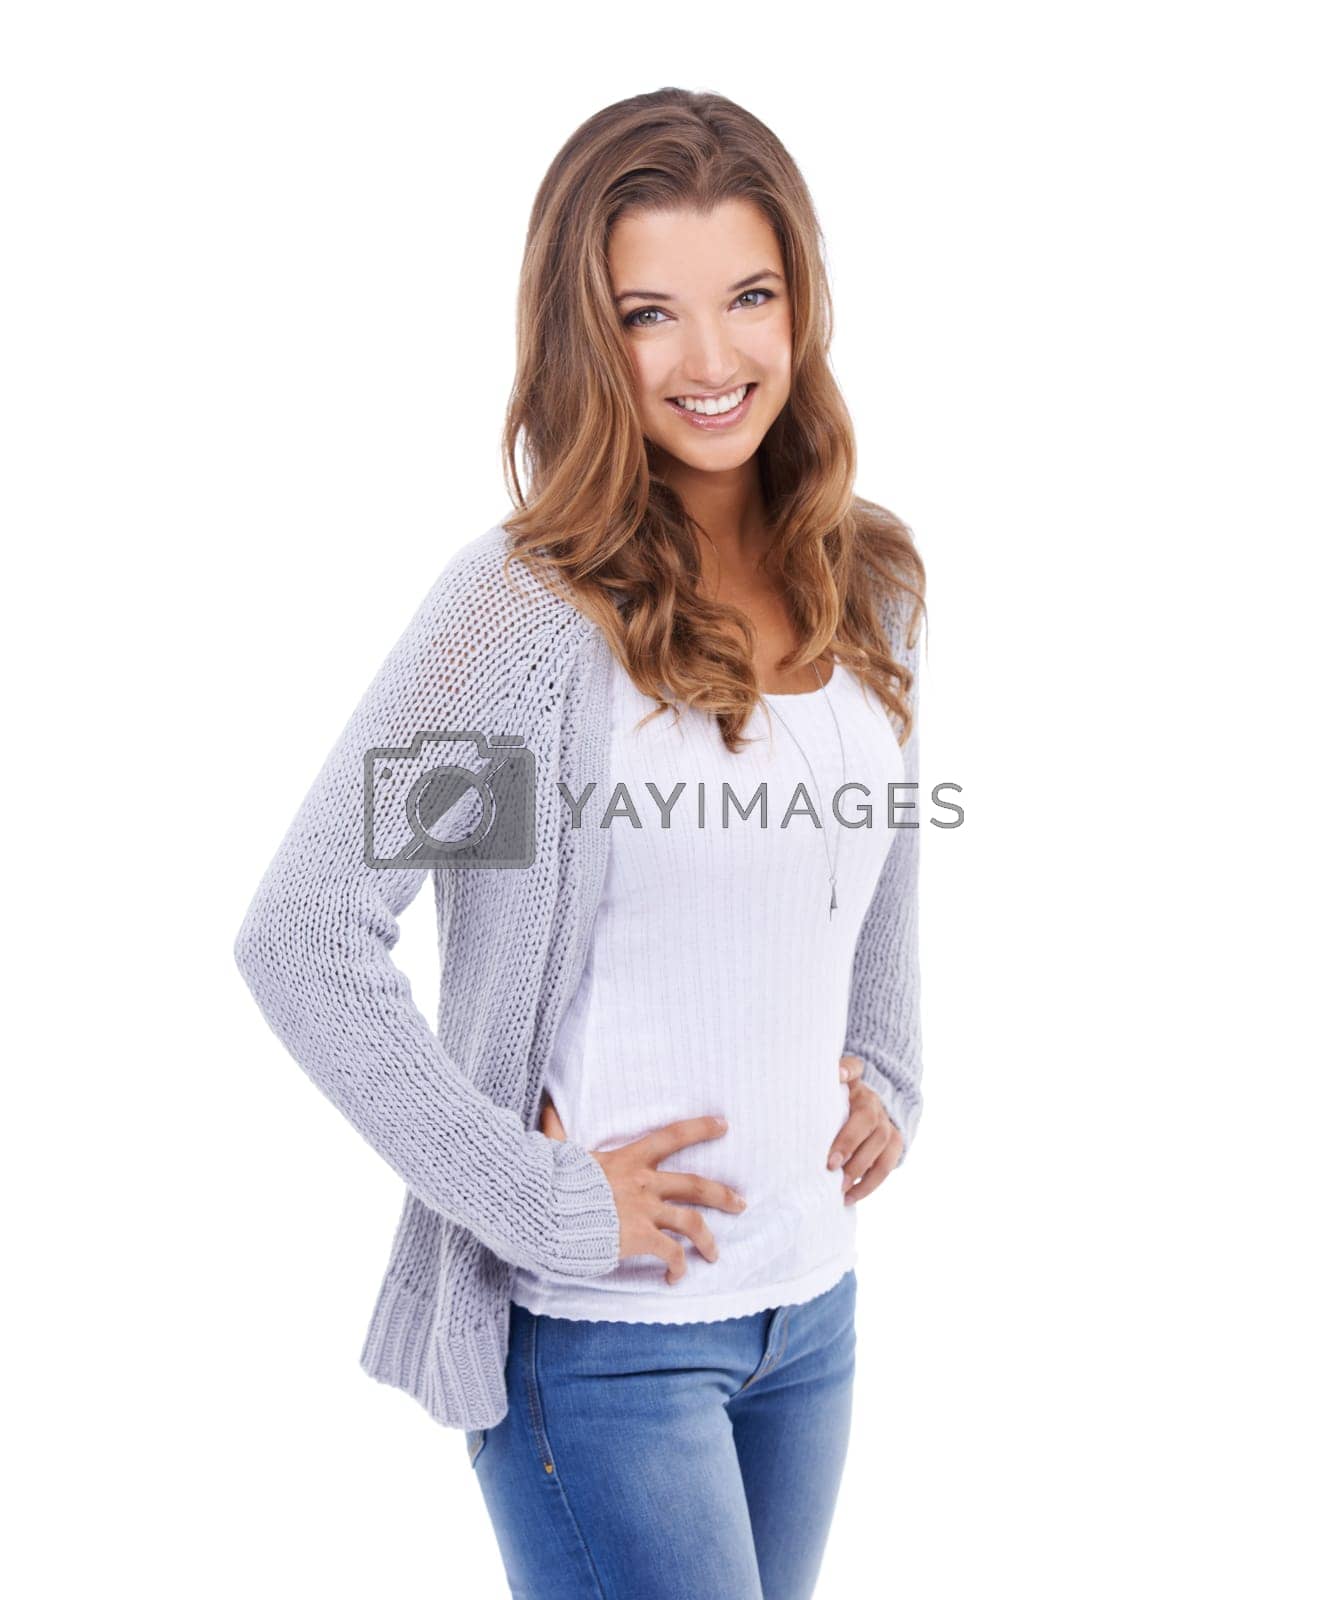 Royalty free image of Beauty in blue jeans. A young woman in casual wear standing against a white background and smiling at the camera. by YuriArcurs